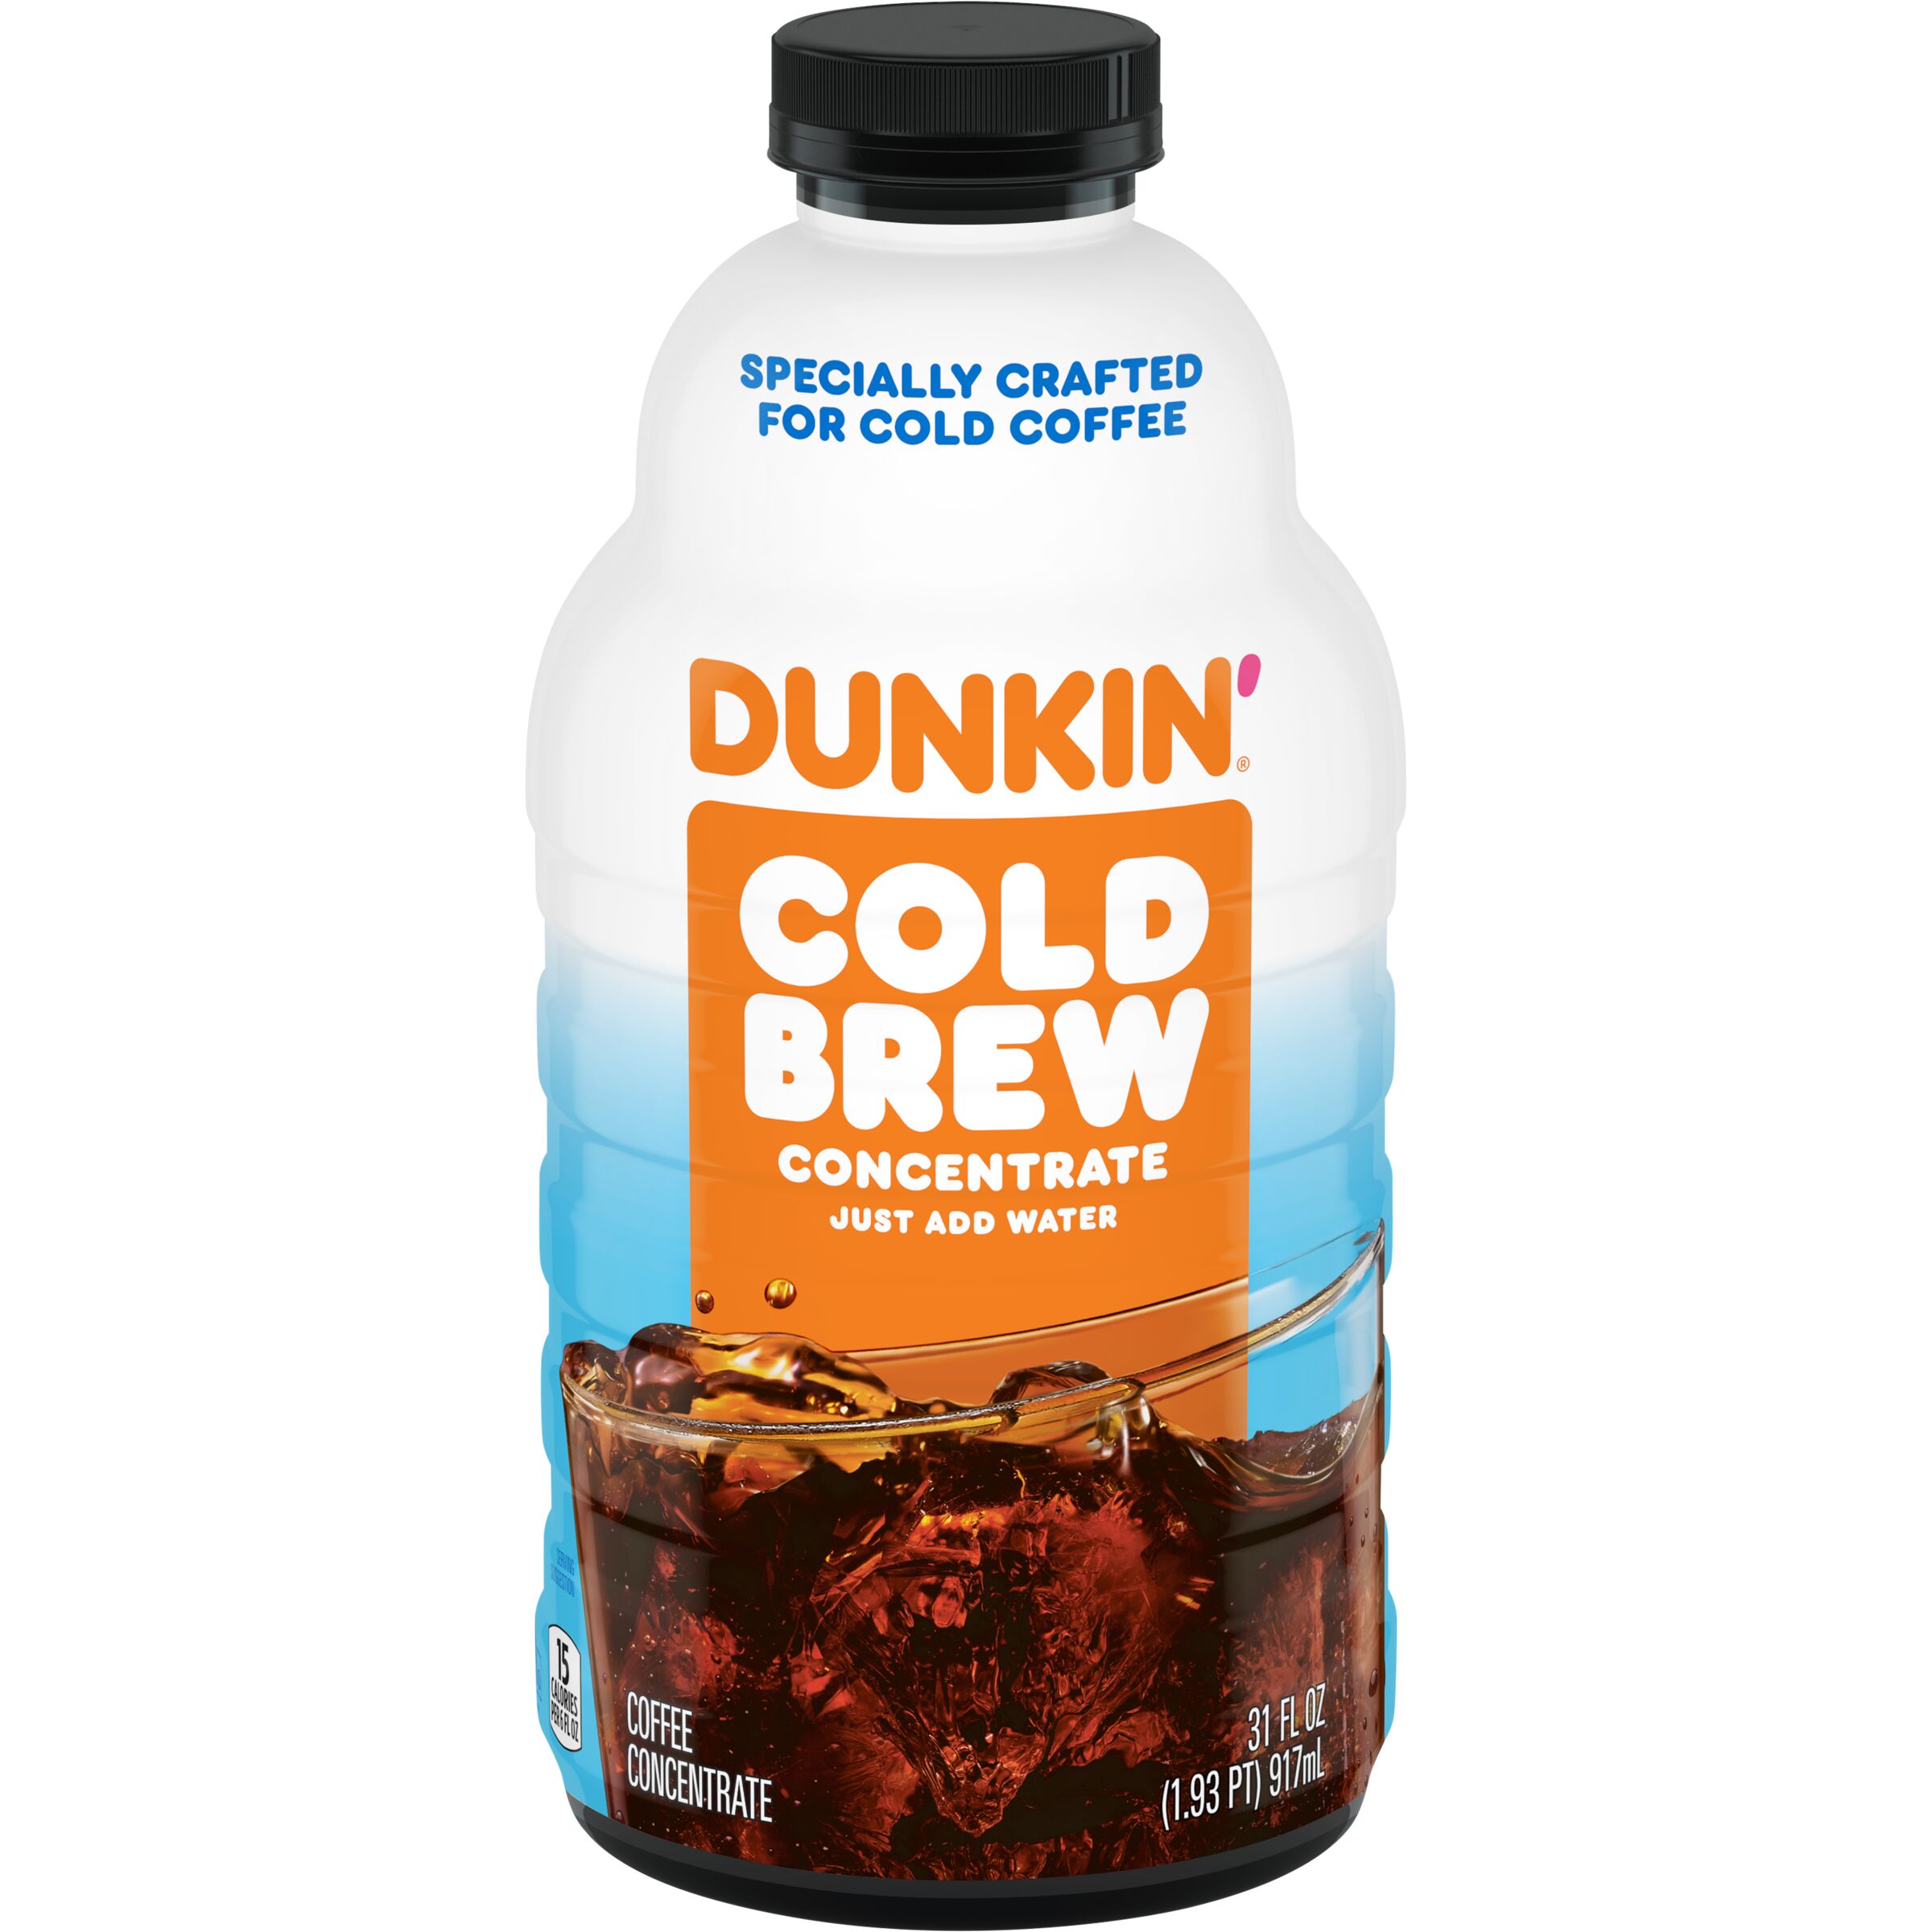 Dunkin Cold Brew Coffee Concentrate, 31 Oz. - image 1 of 13